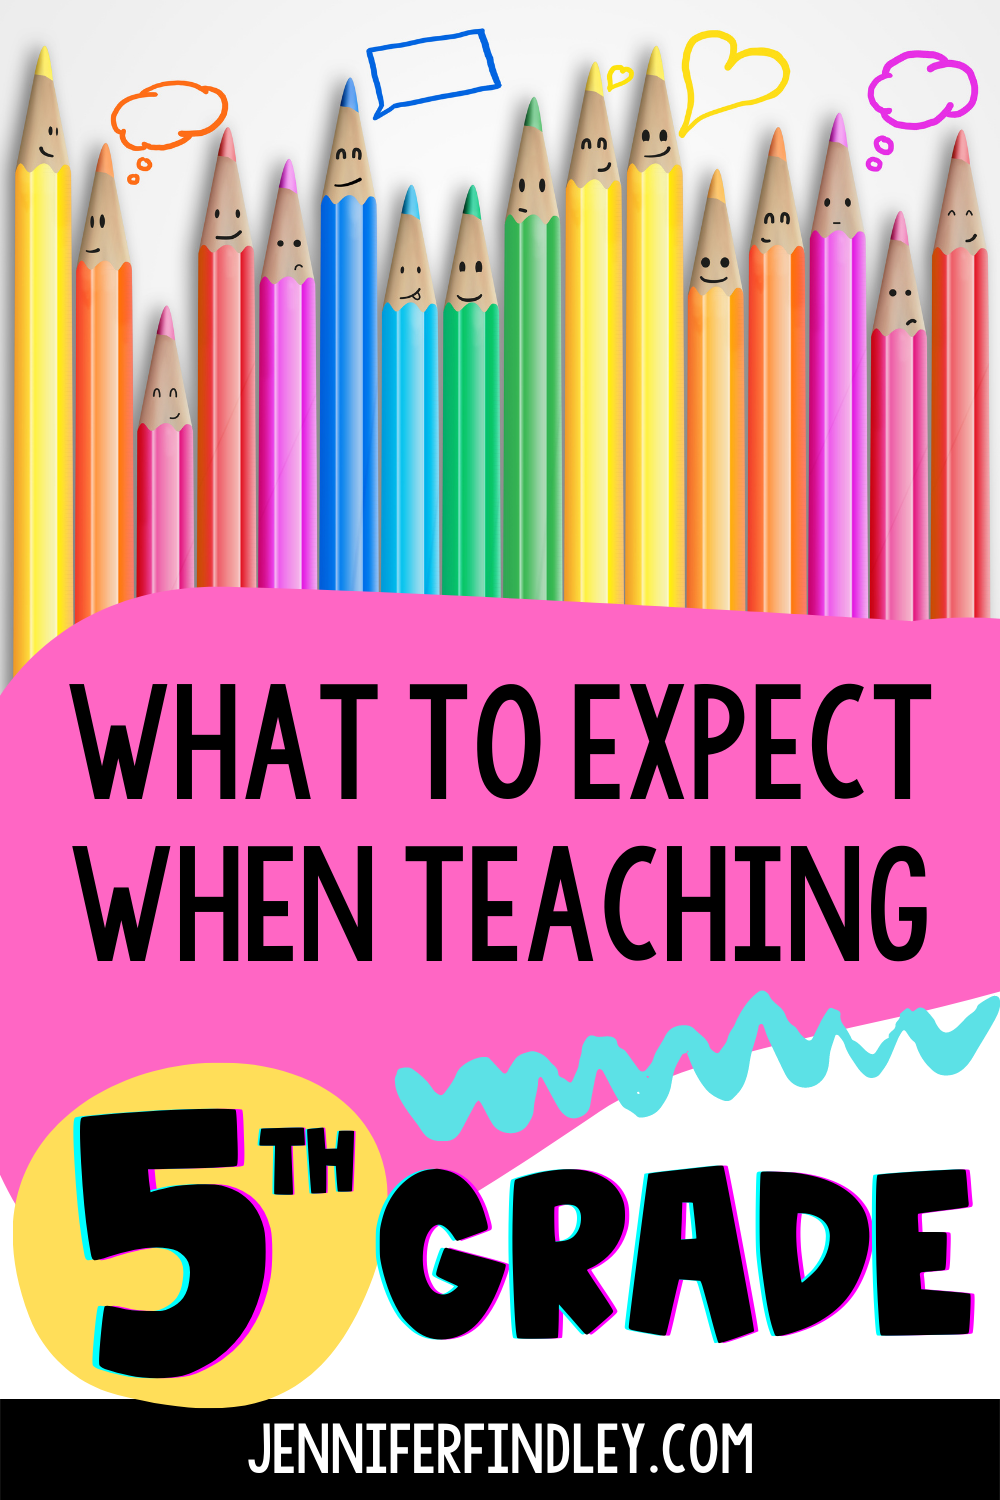 If you are new to teaching 5th grade or thinking about teaching 5th grade, here are my top things to know about teaching 5th graders.